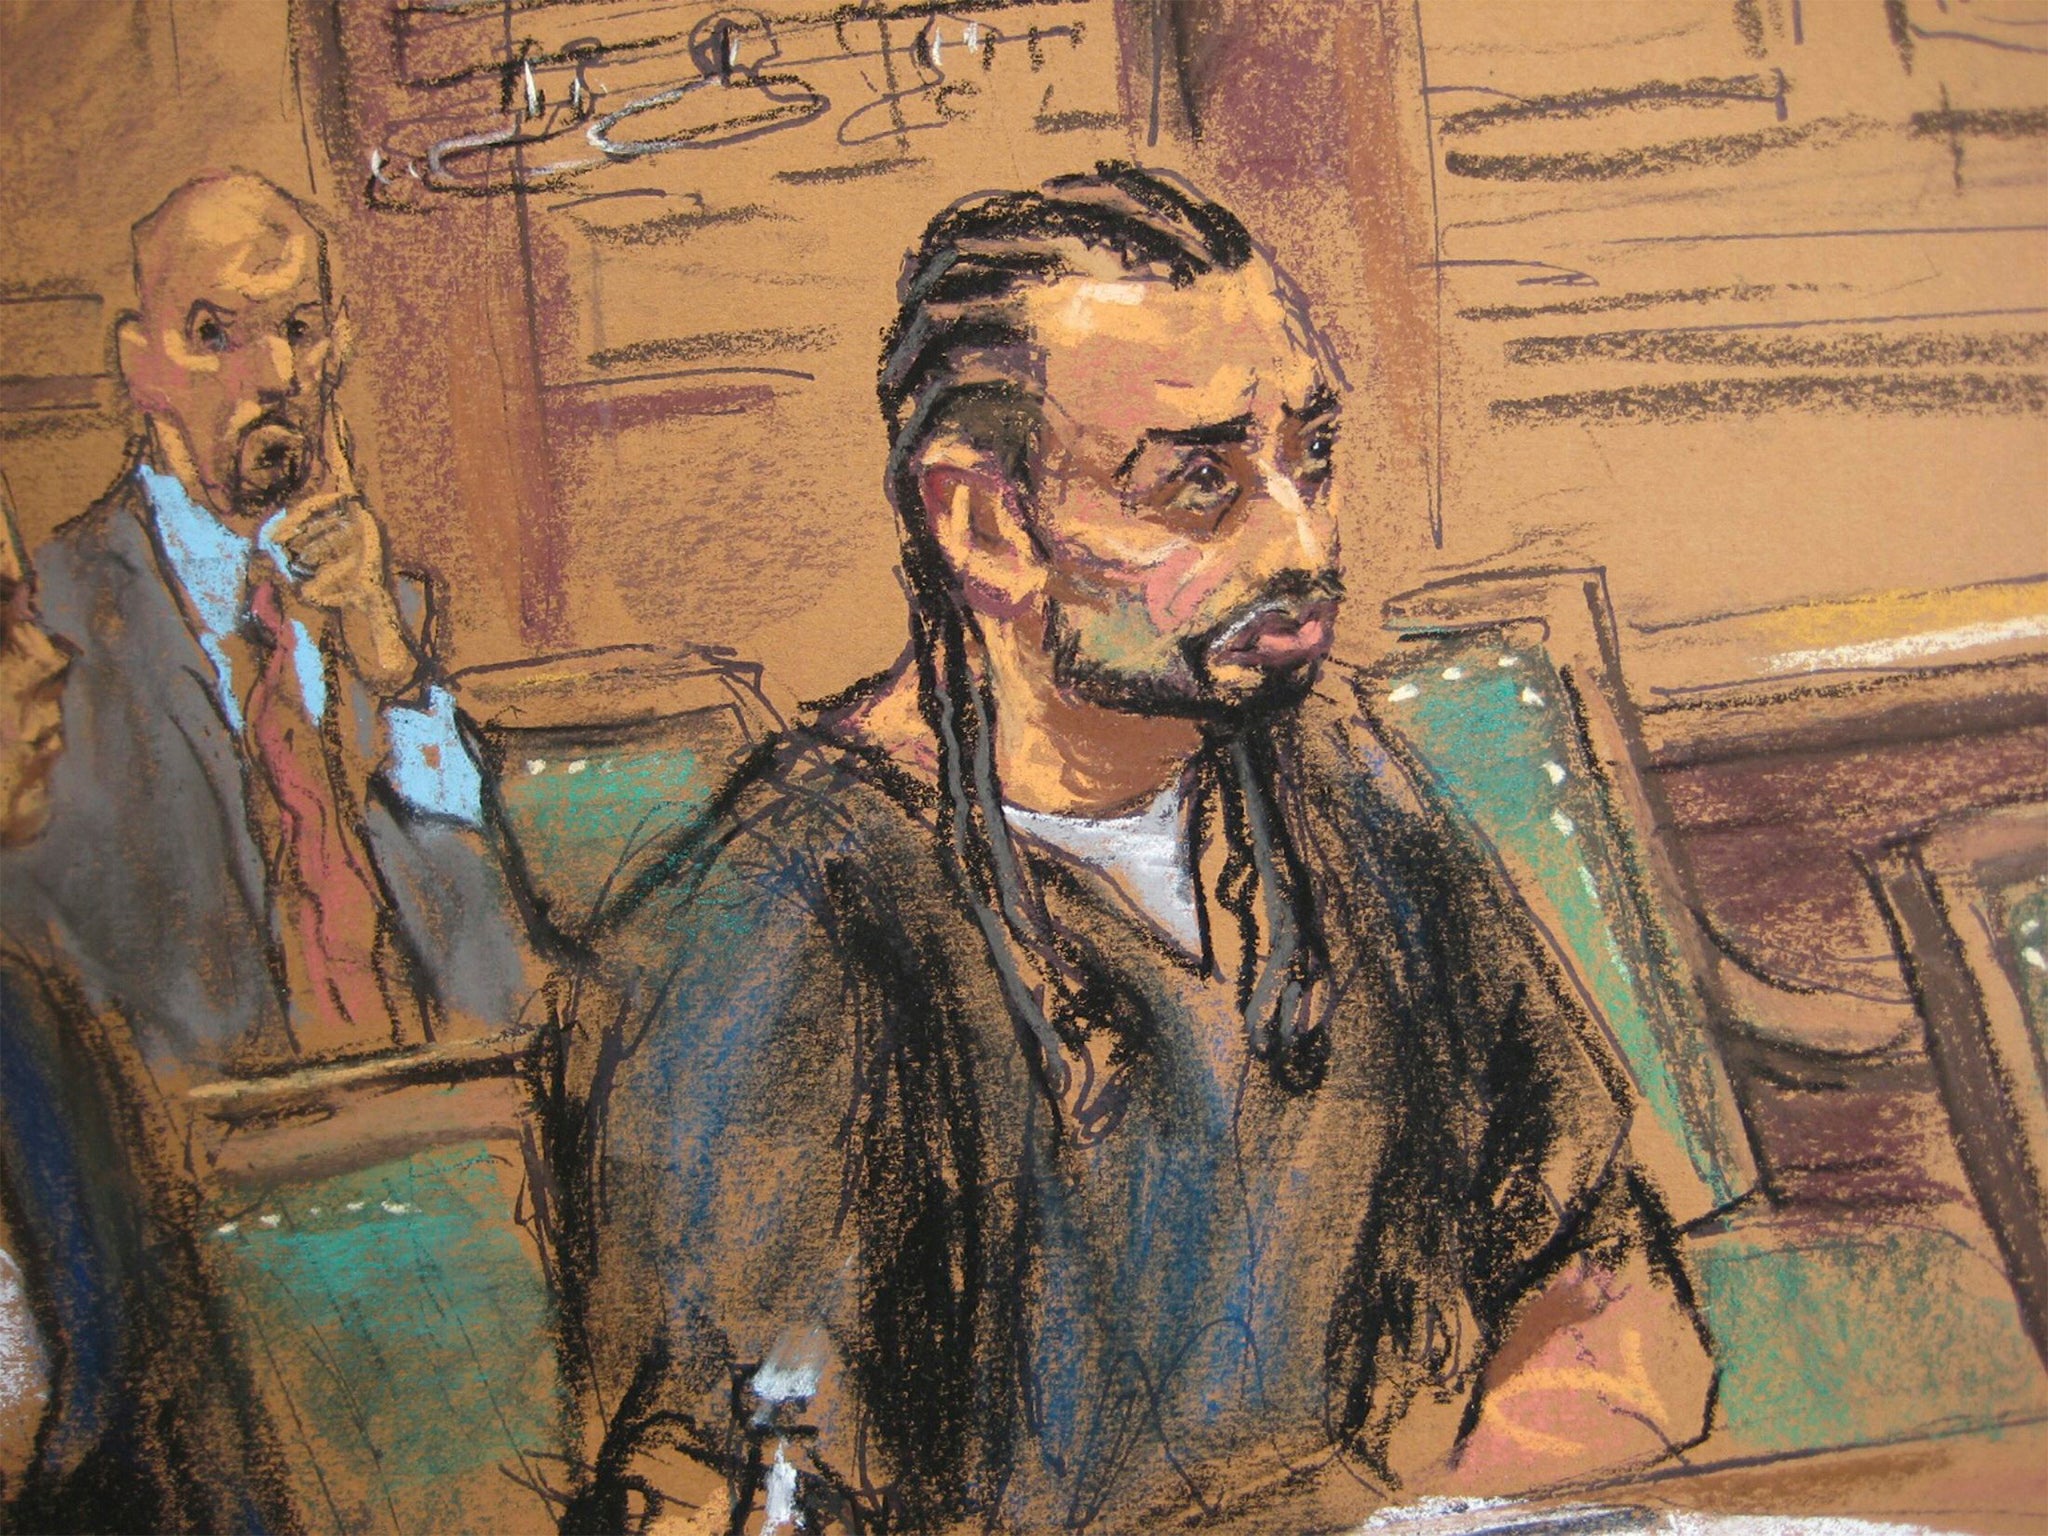 Haroon Aswat, 41, is shown in this courtroom sketch during sentencing in U.S. Federal court in New York,